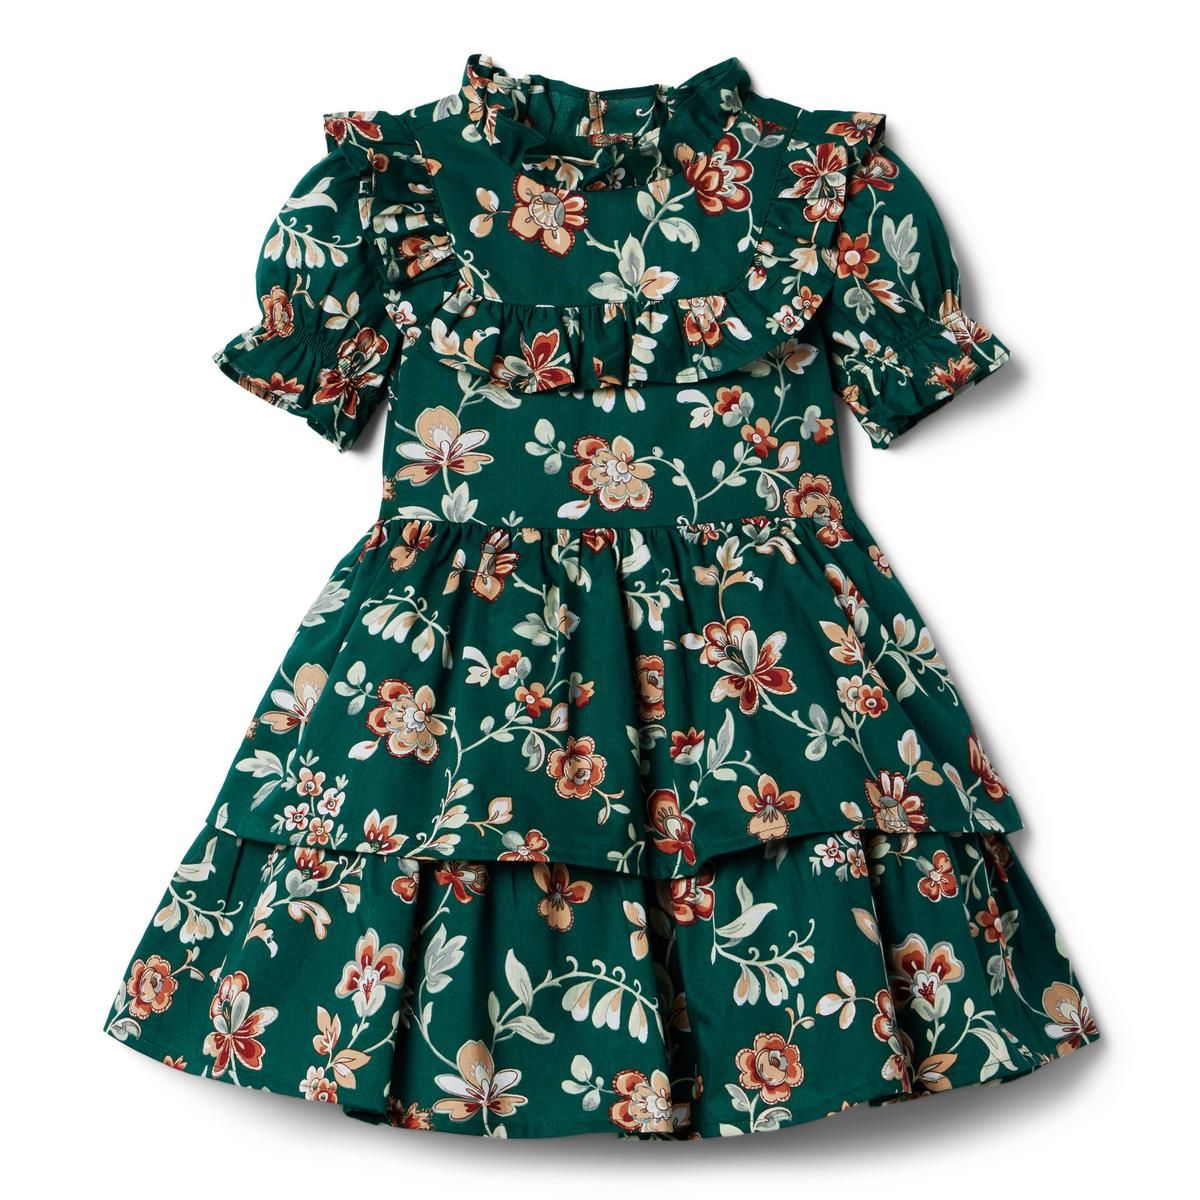 Floral Ruffle Dress | Janie and Jack